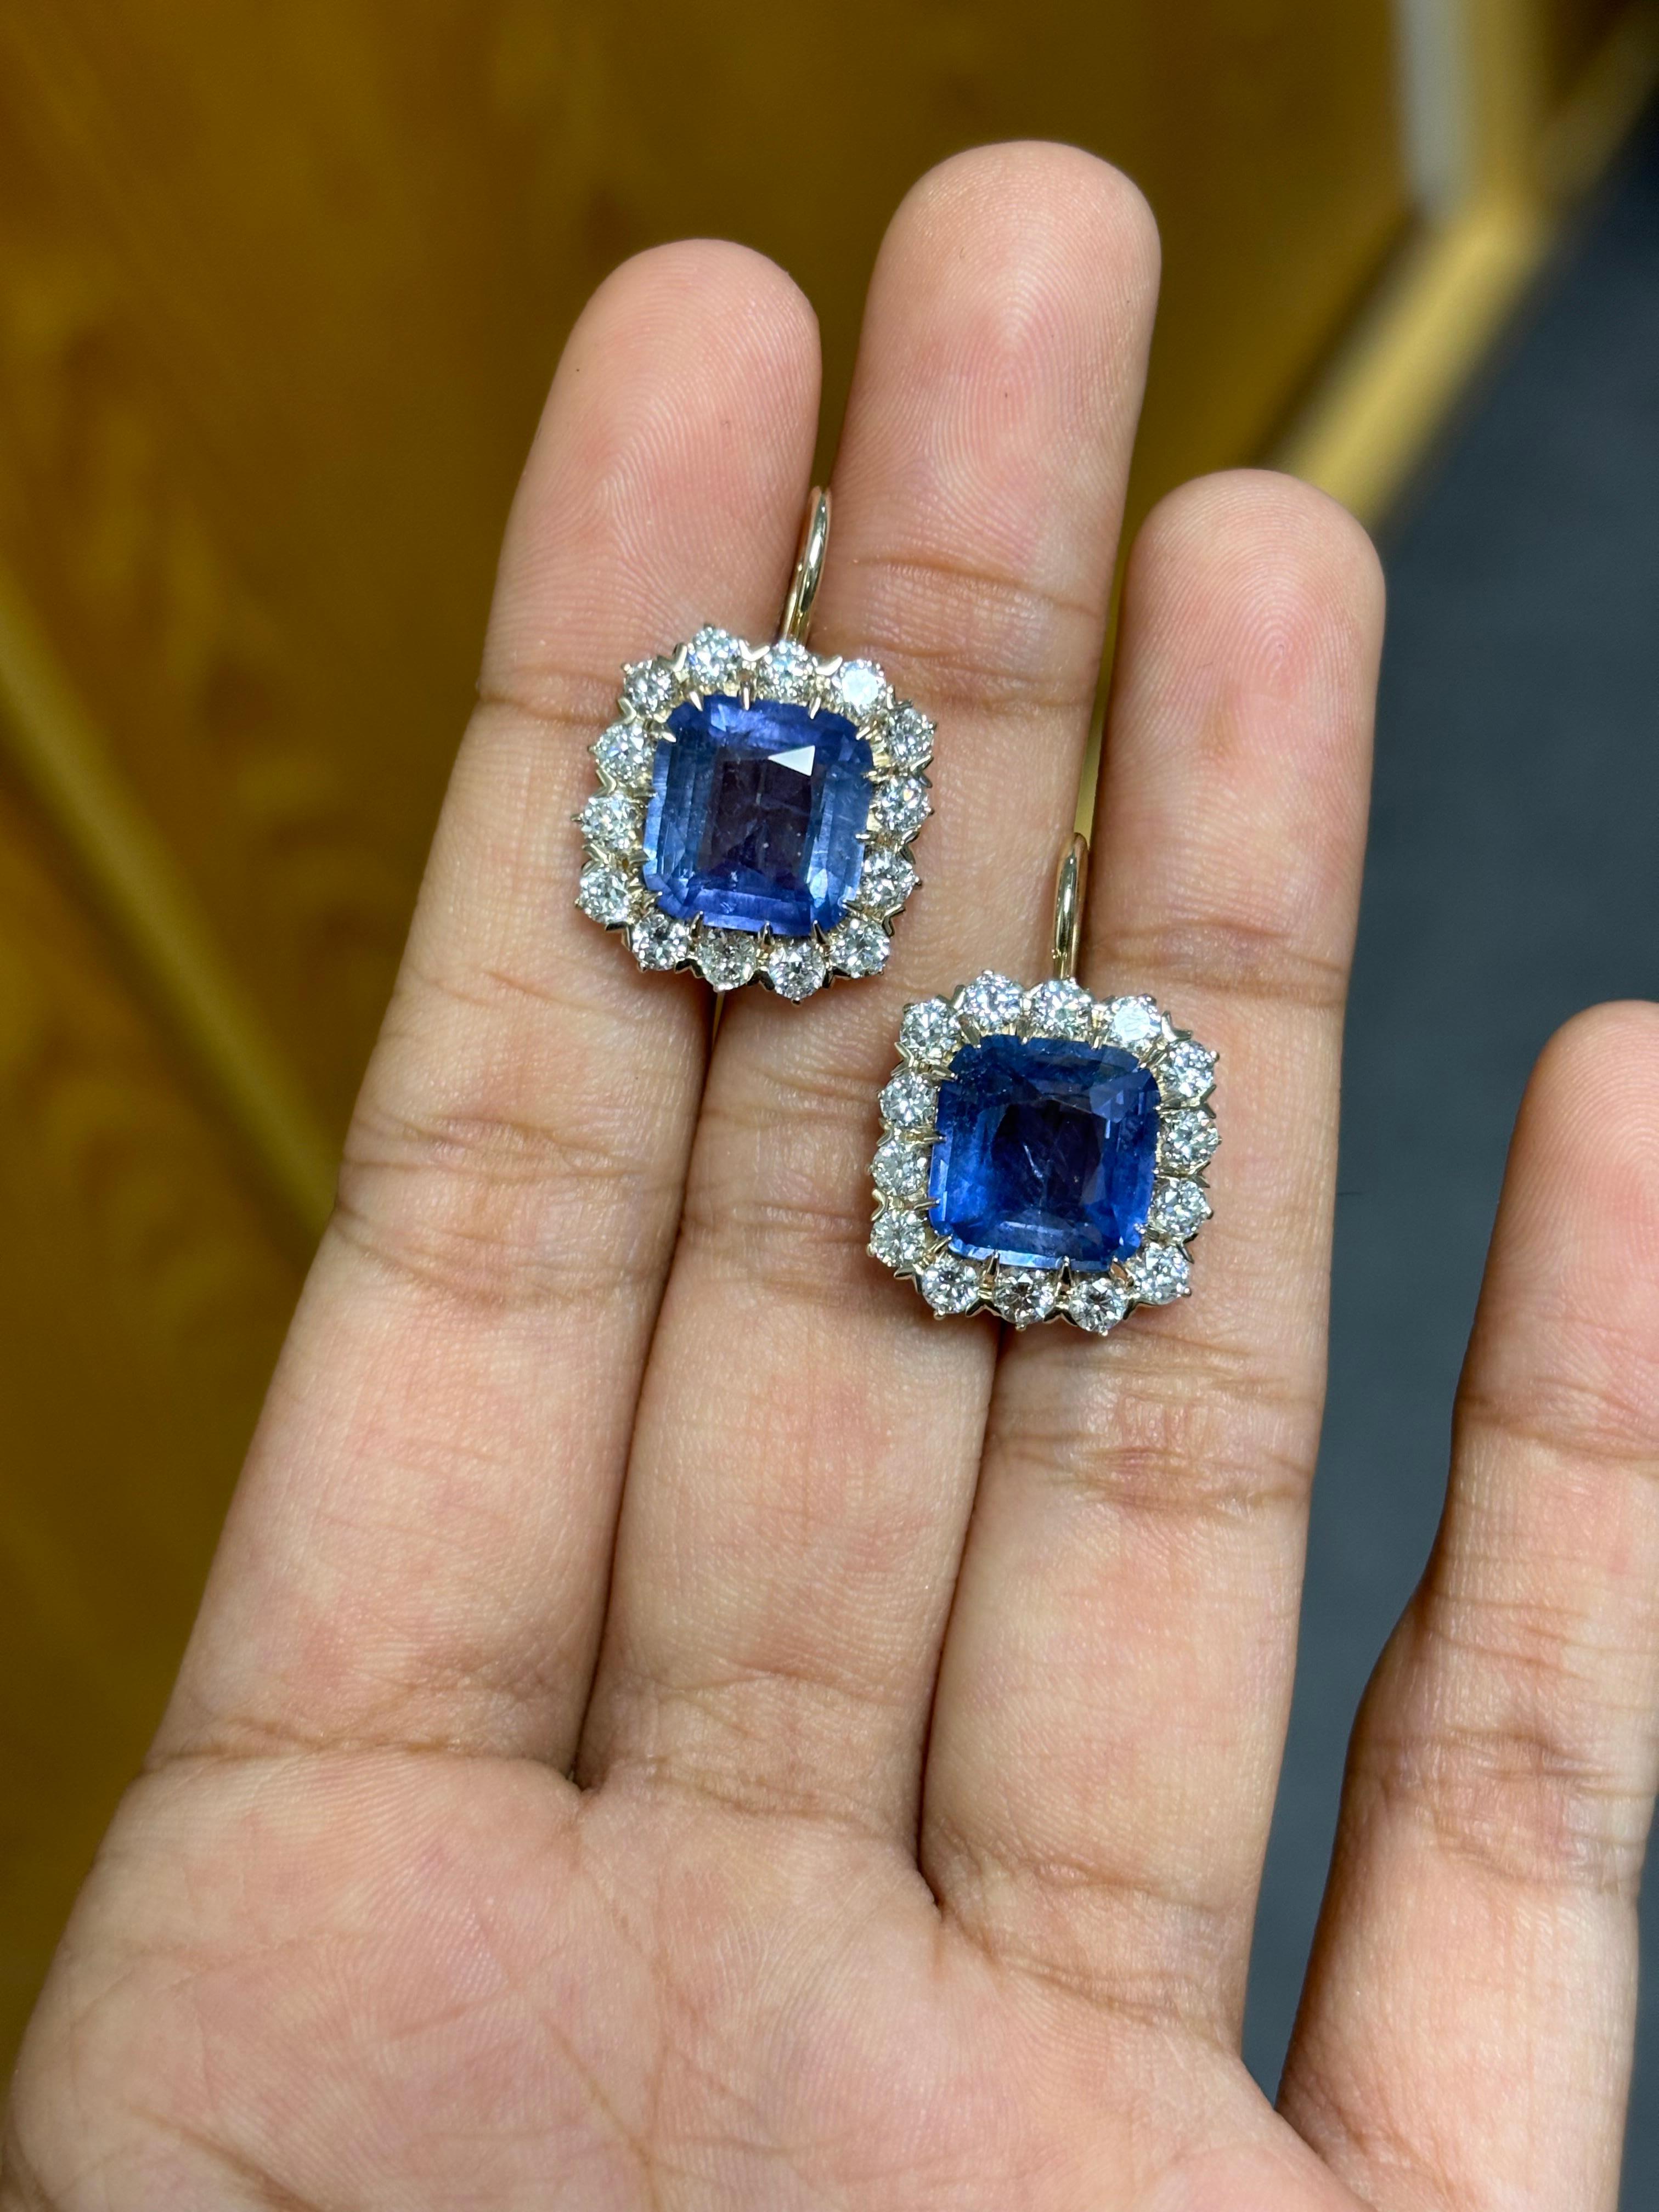 Introducing an exquisite masterpiece of elegance and sophistication from our beloved collection, these enchanting Sapphire & Diamond drop earrings. Handcrafted with unparalleled craftsmanship, these top-quality earrings are a testament to the